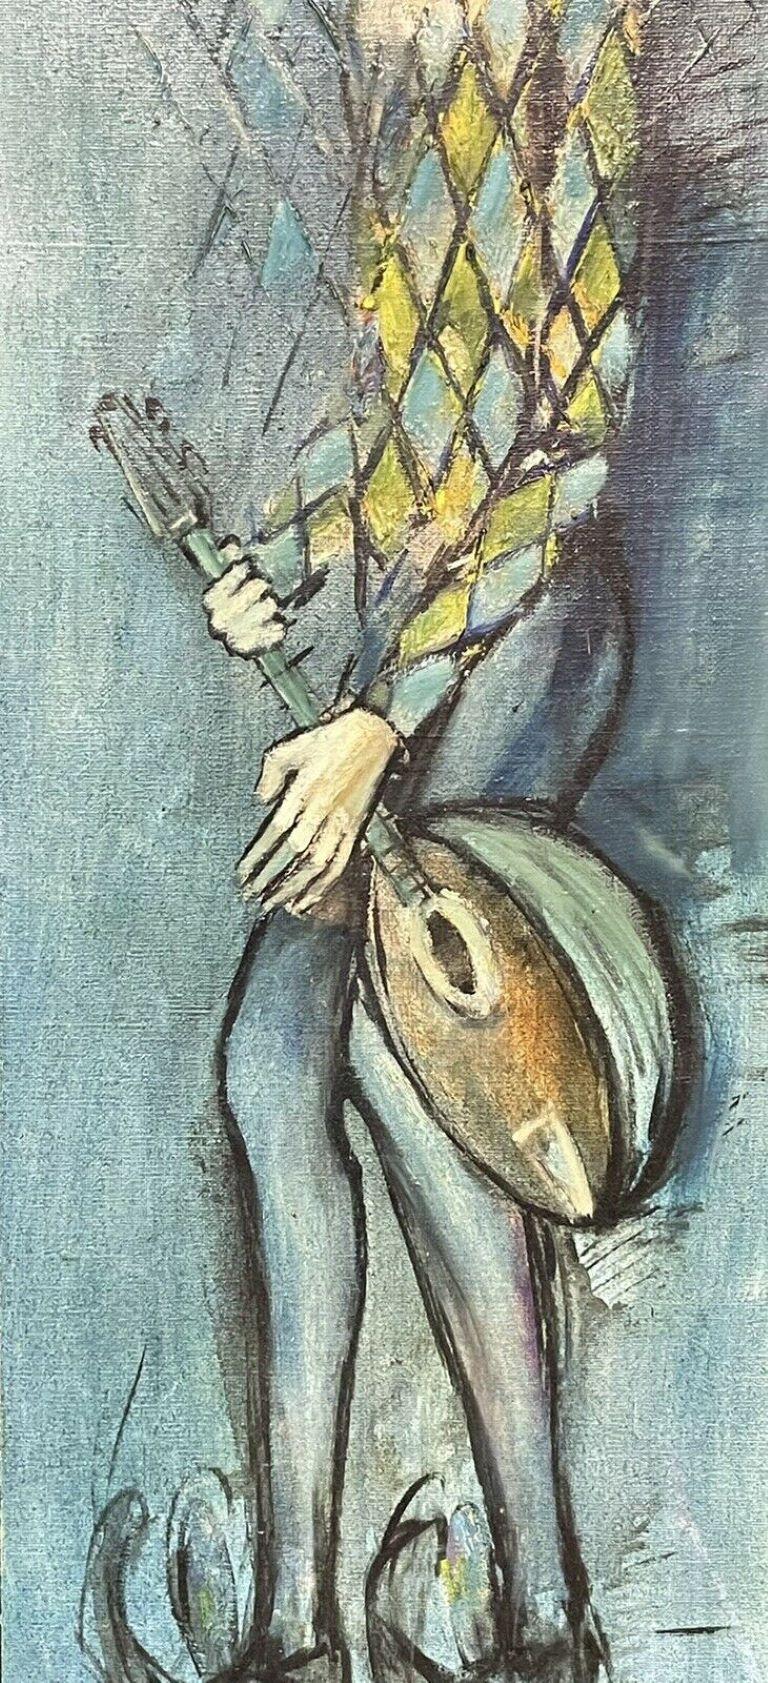 Artist/ School: Rene Cazassus (French b. 1932), signed

Title: Portrait of a man with mandolin.

Medium: oil painting on canvas, framed, signed and an envelope is also enclosed as per photographs.

Size:    framed: 48.25 x 16 .75 inches 
          